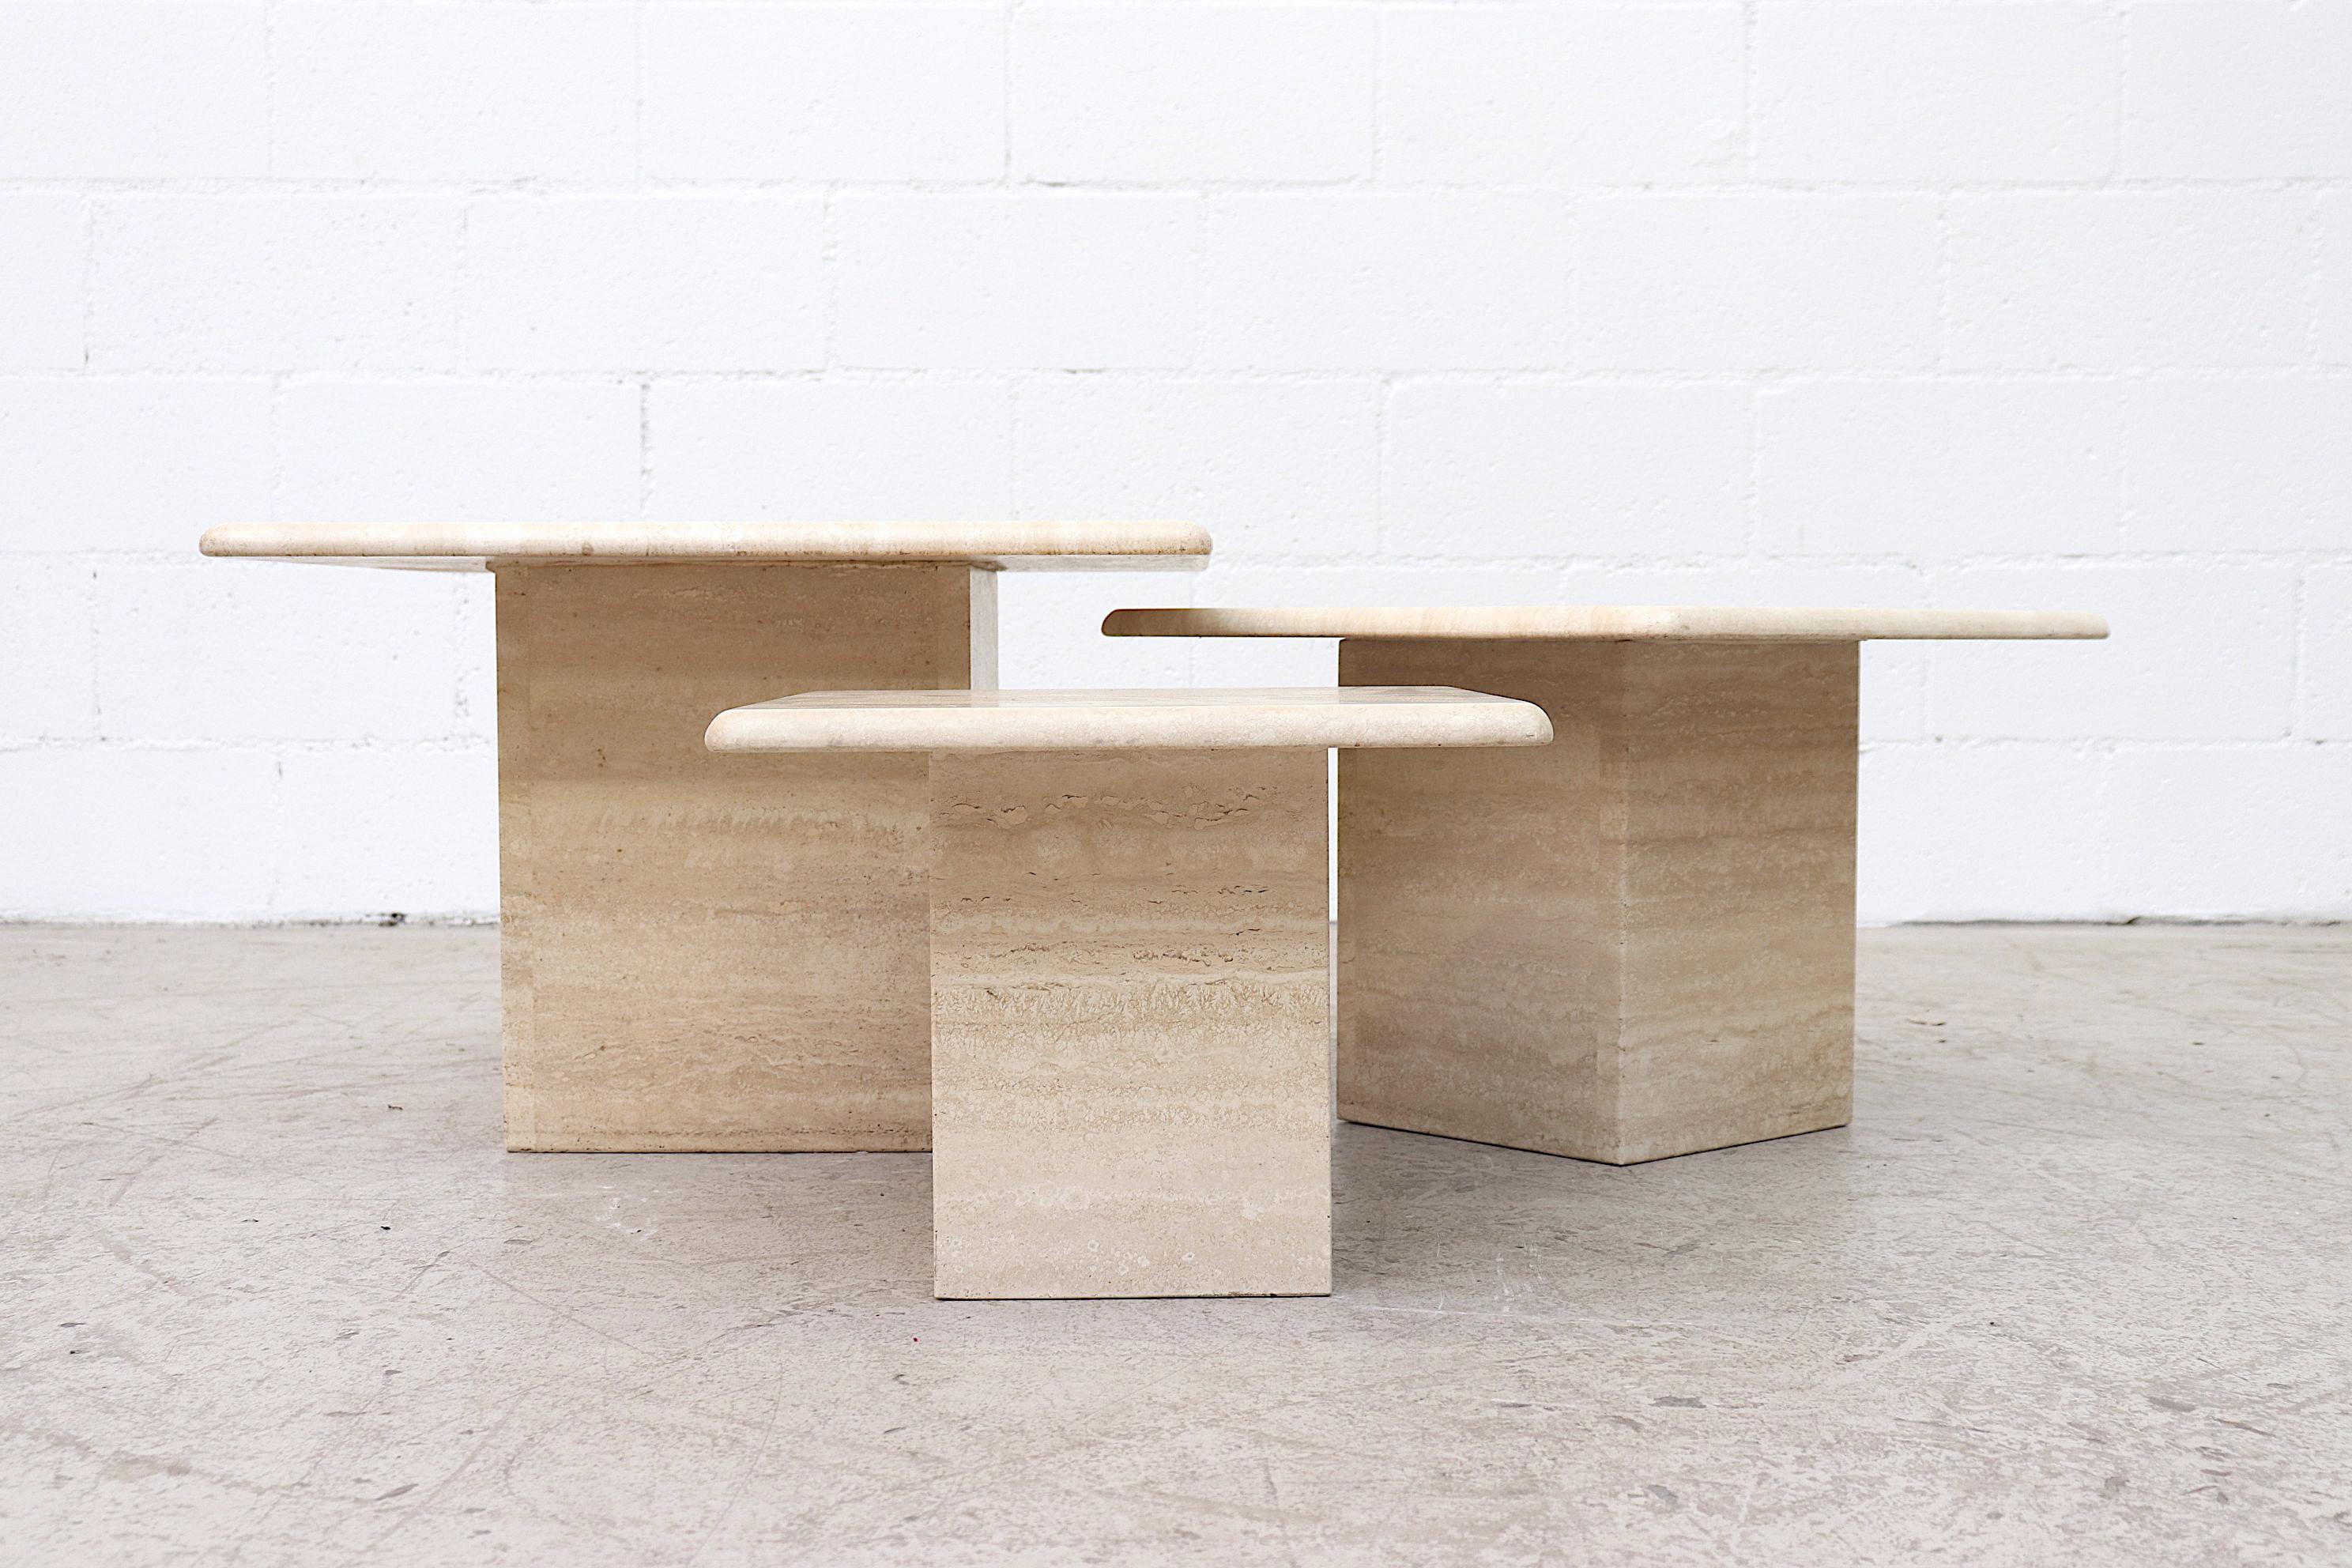 Set of 3 Travertine coffee or side tables with matching travertine base. In original condition with minimal wear or chipping.
Measures: Large 23.75 x 23.75 x 16
Medium 20 x 20 x 14
Small 16 x 16 x 12.